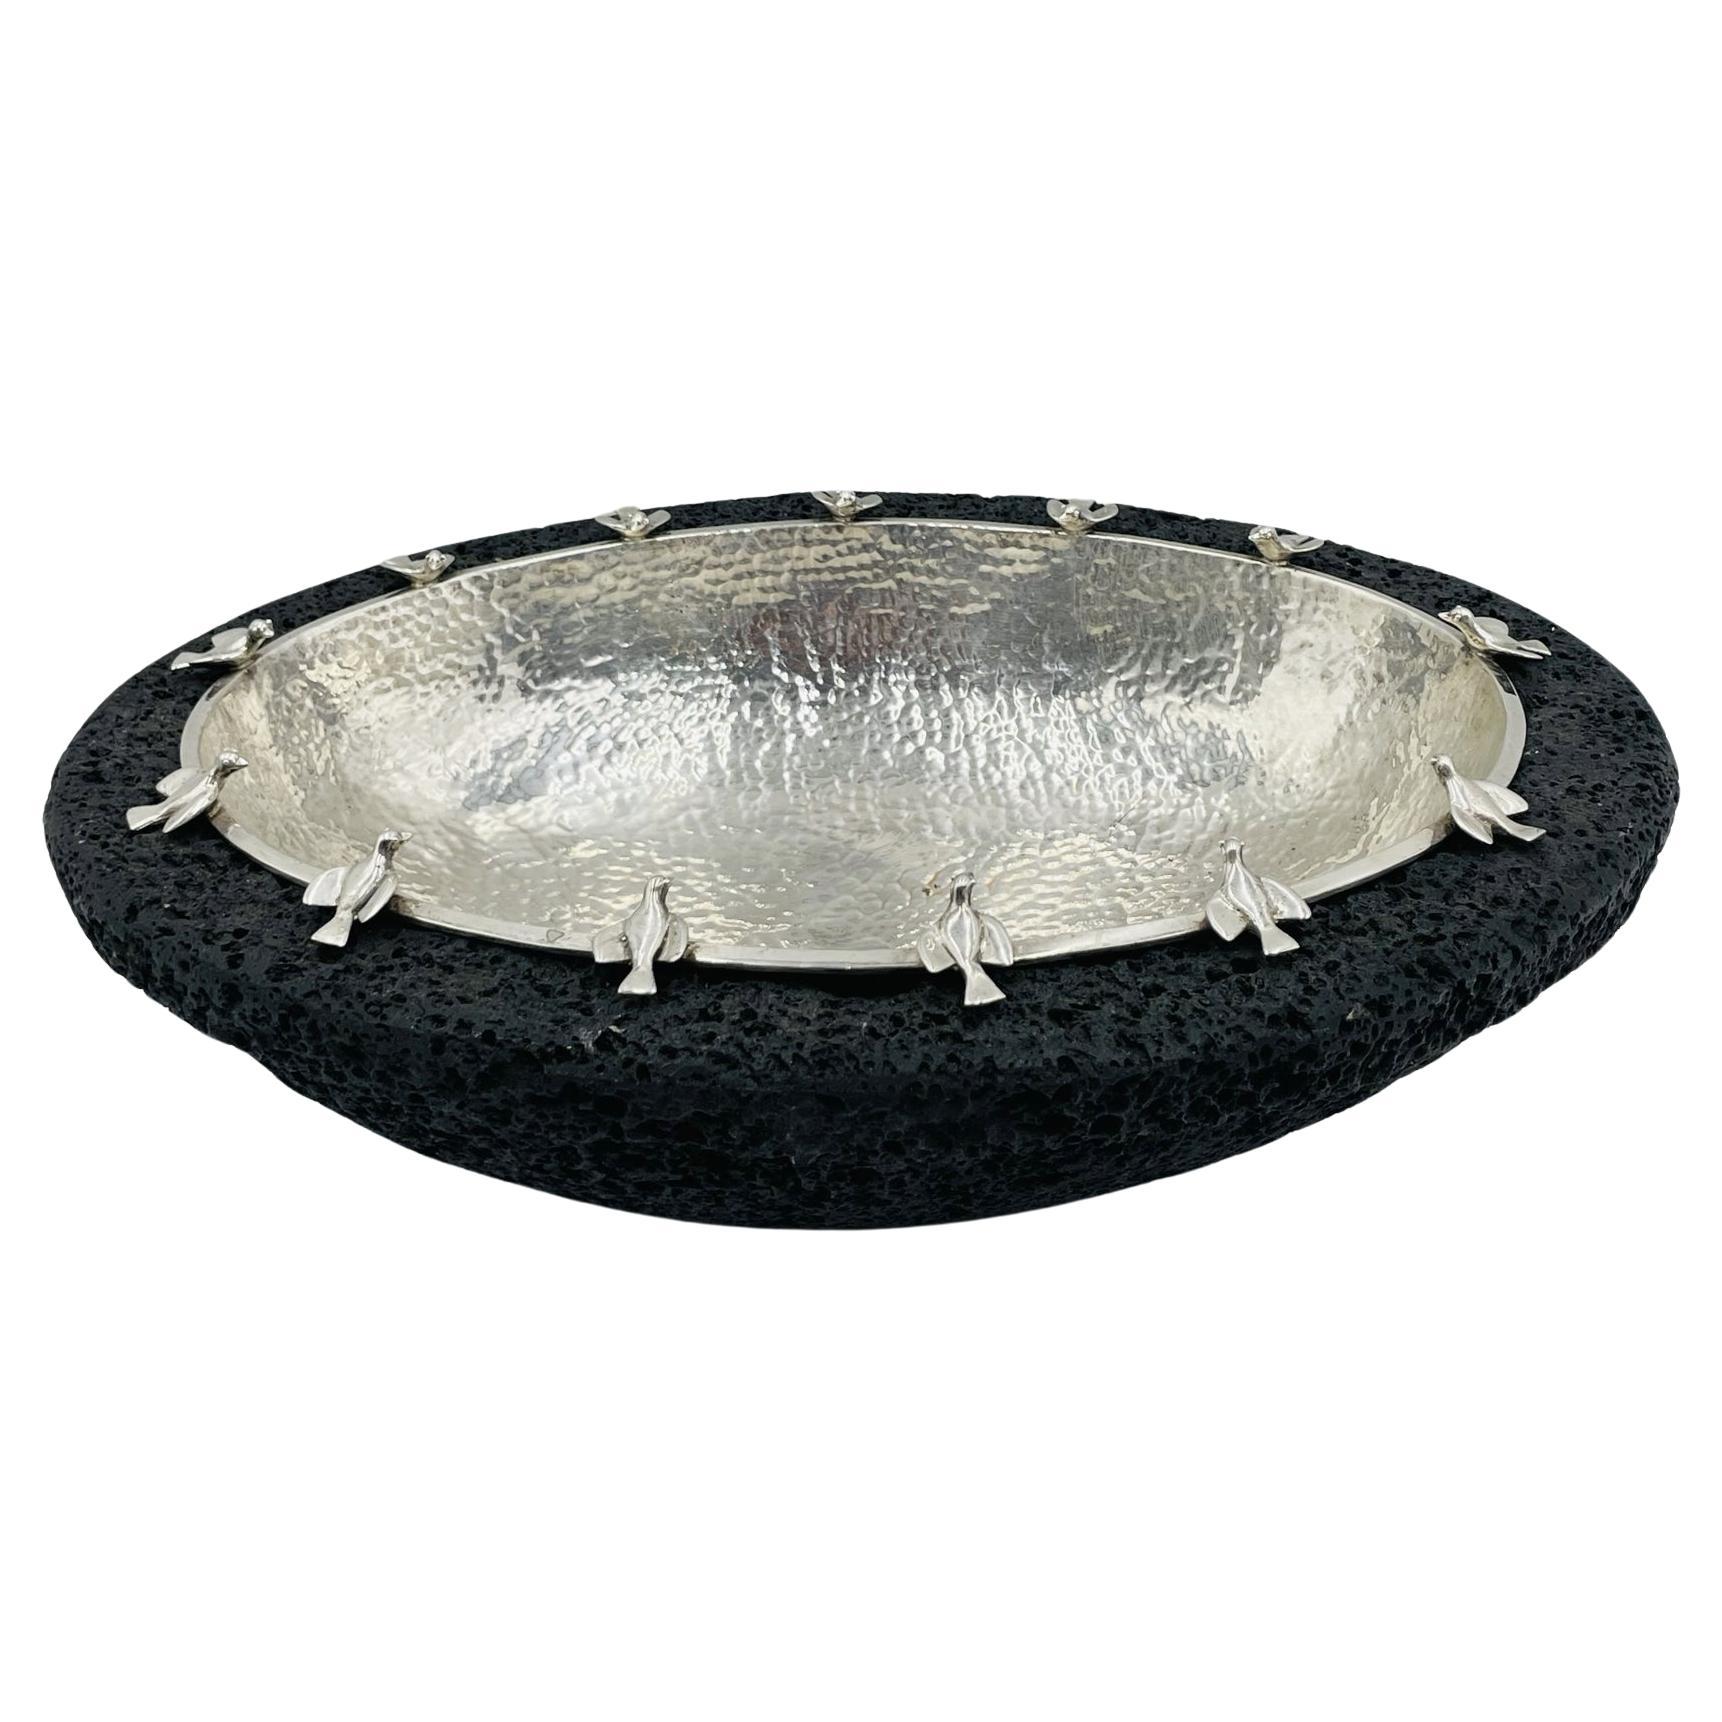 Silver-Plate Bowl with Bird Detail on Volcanic Rock baseby Emilia Castillo